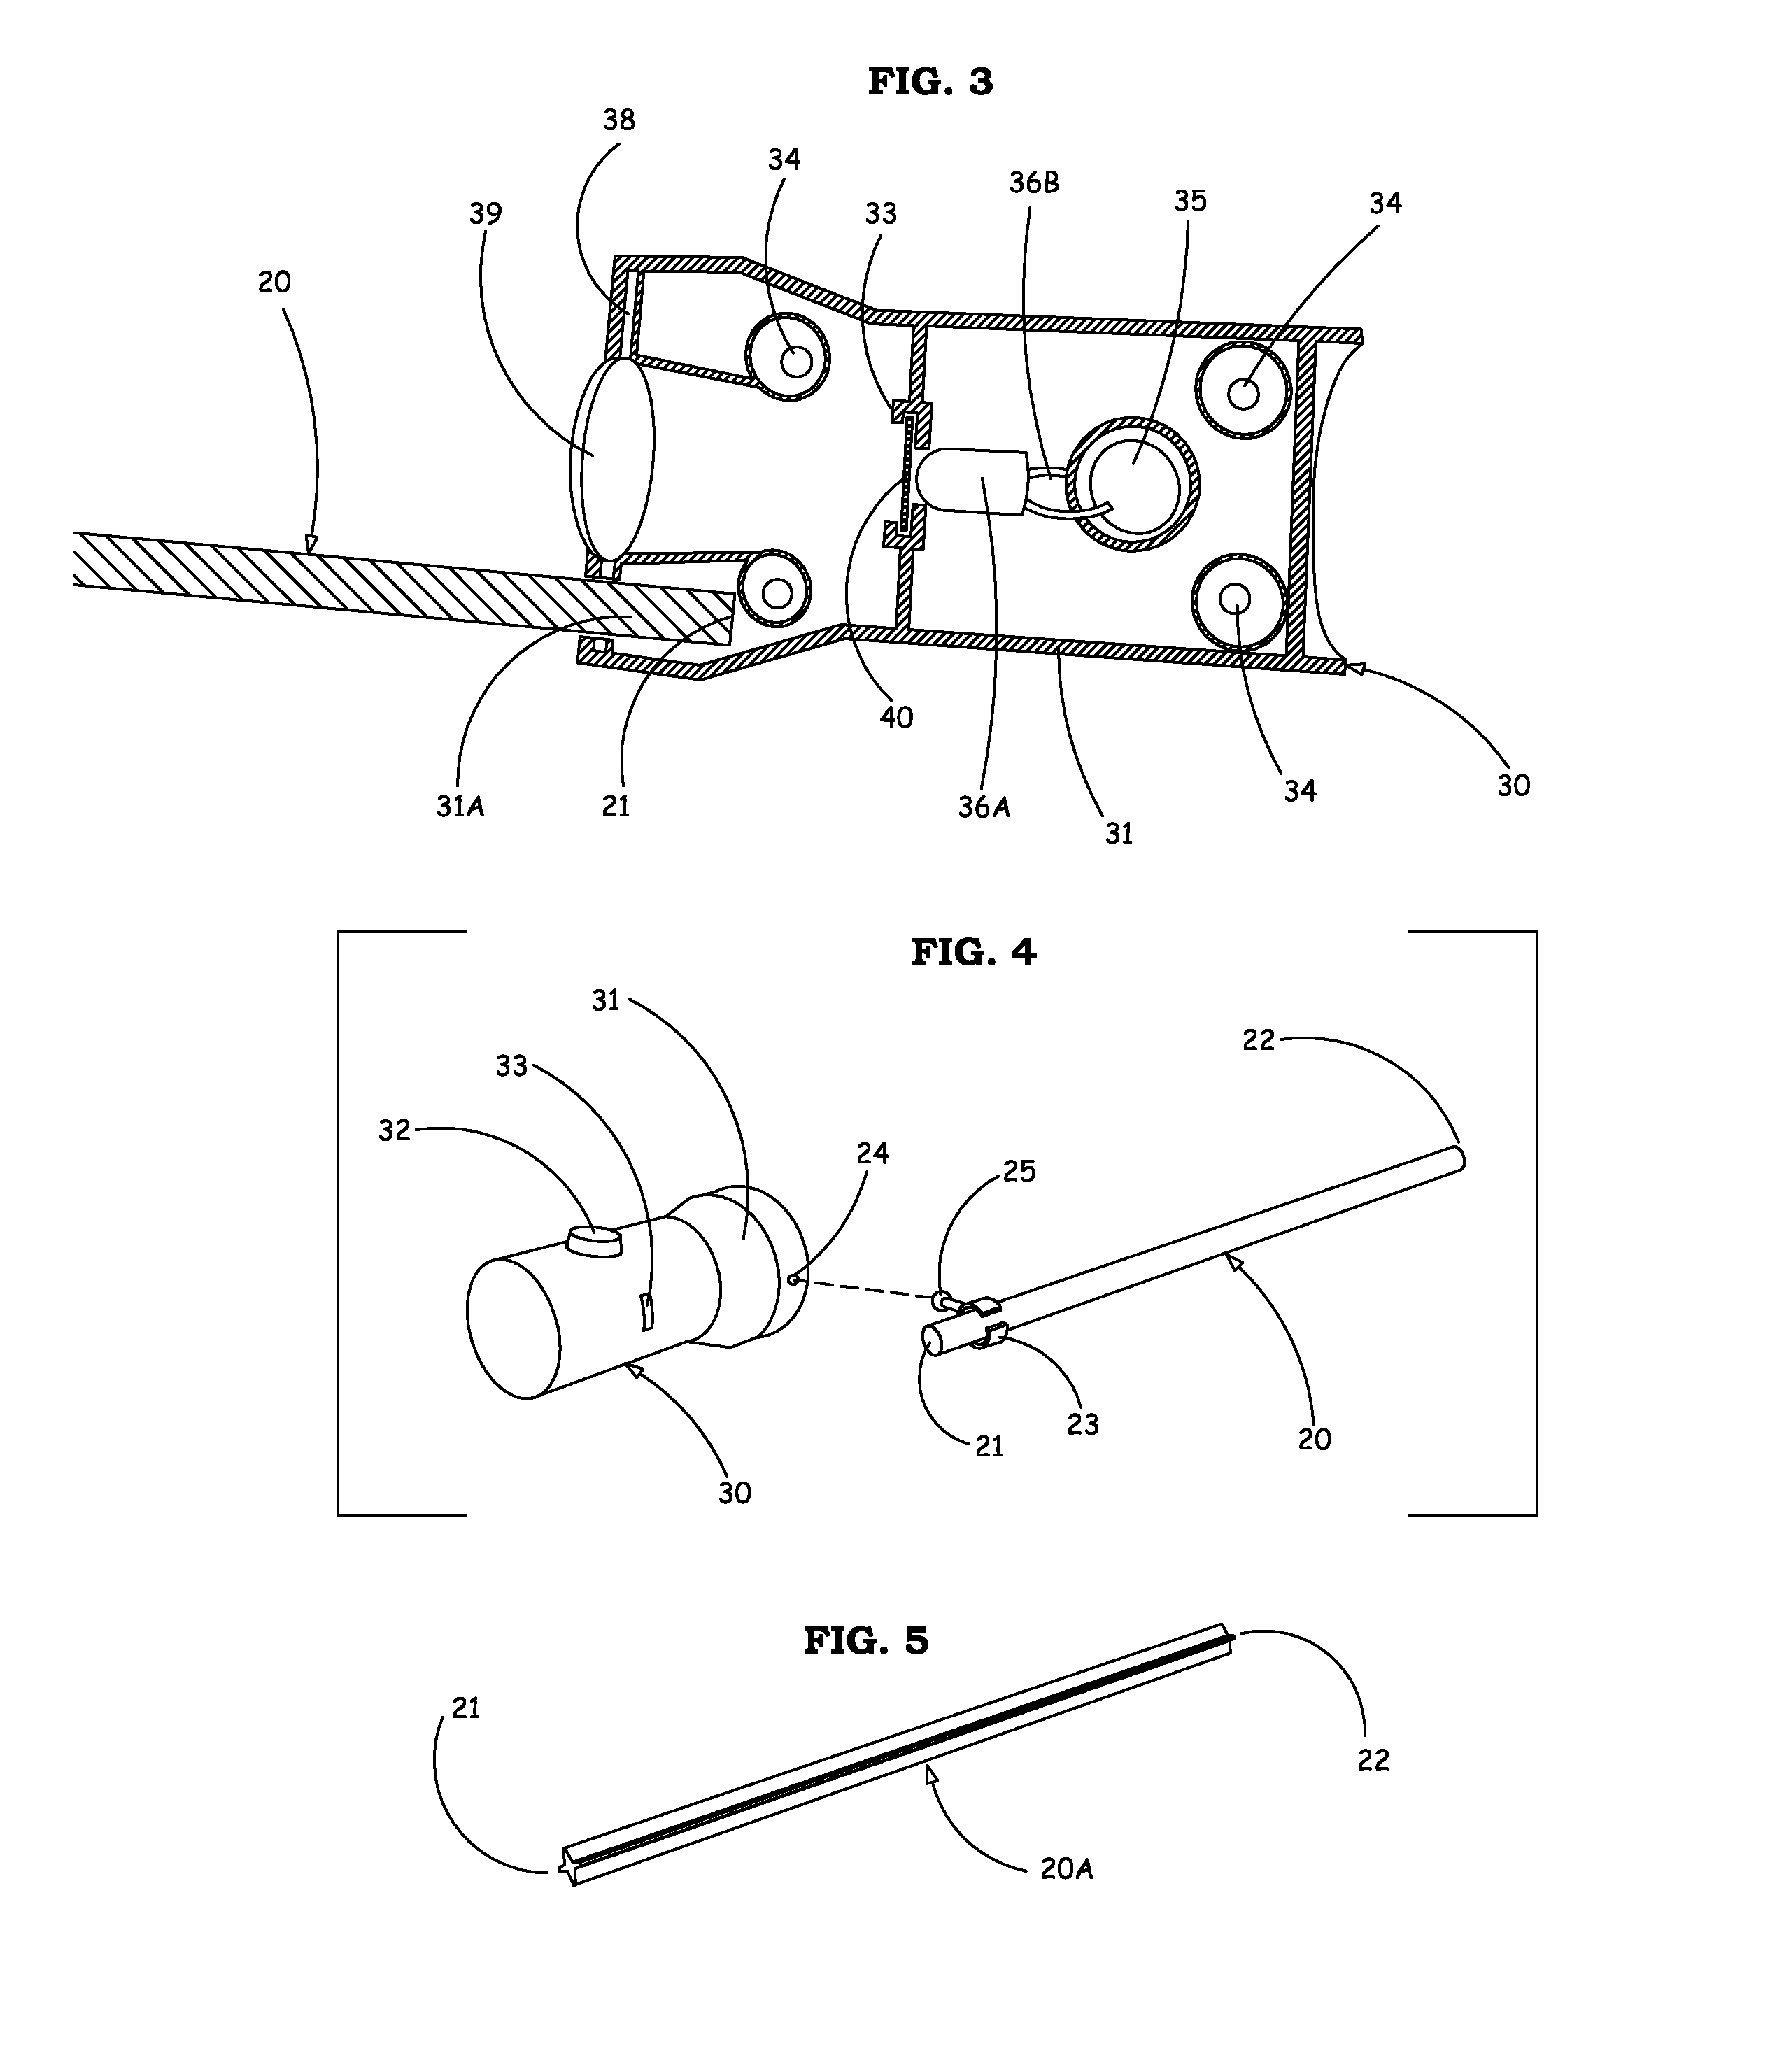 Device and Method for the Transfer of Patterns to an Object